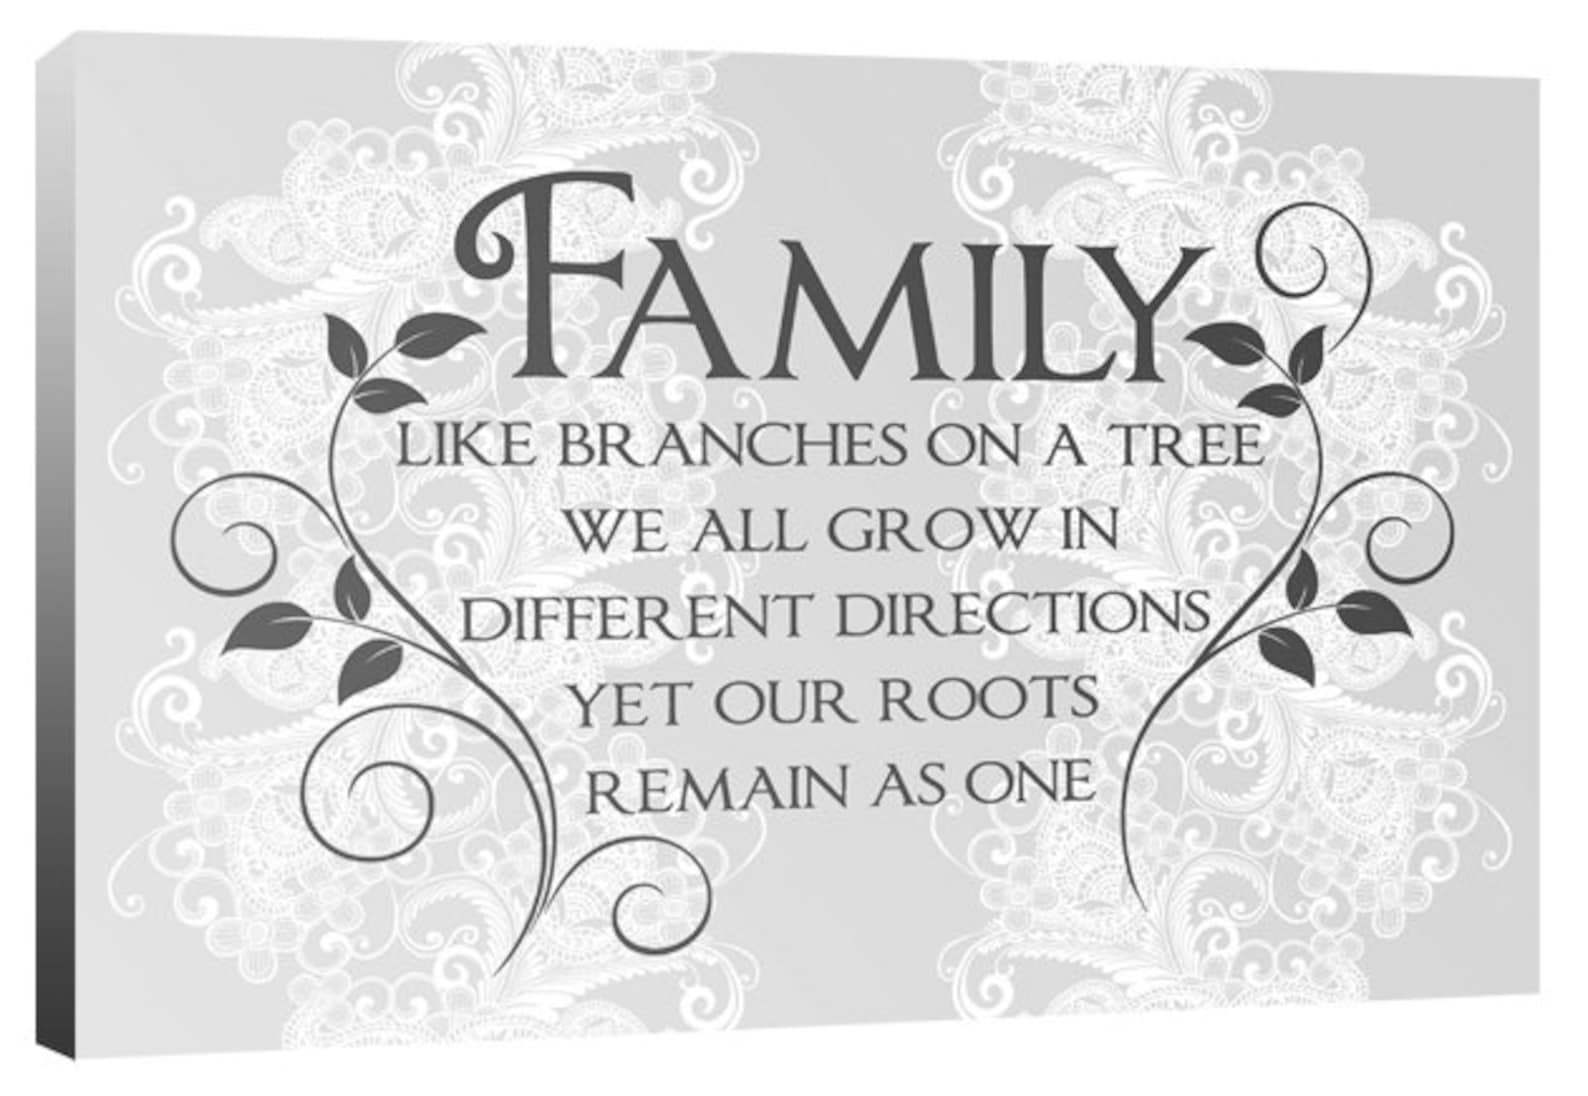 We like to have family. Лайк Фэмили. Like Family. Family quotes. Quotes about Family.